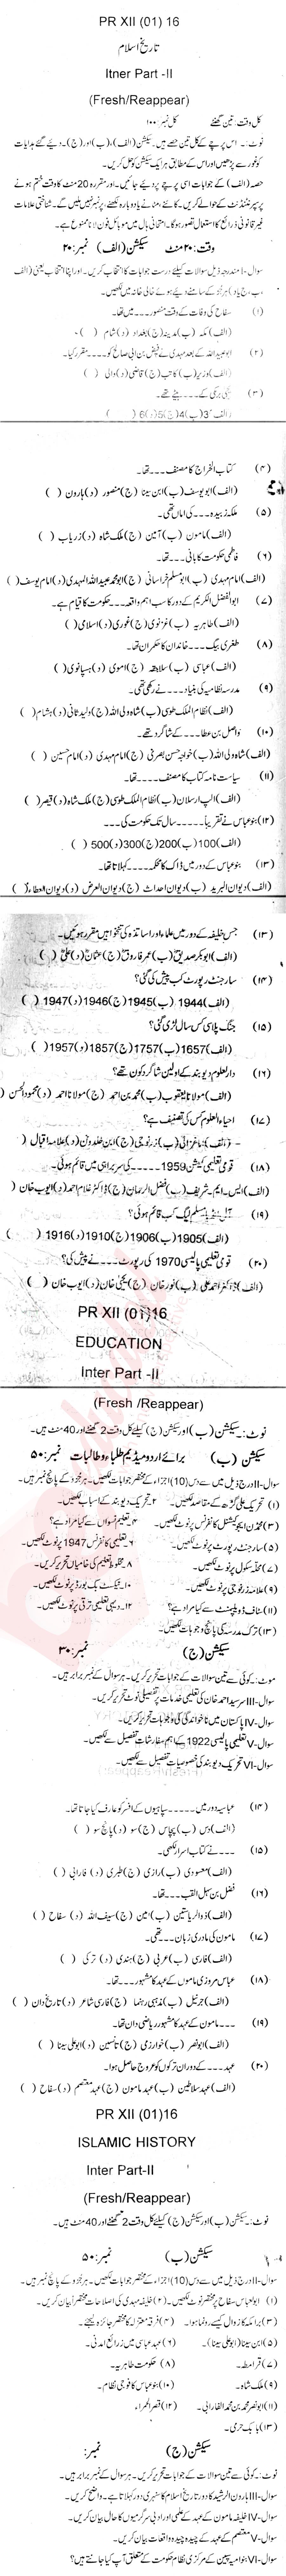 Islamic History FA Part 2 Past Paper Group 1 BISE Bannu 2016